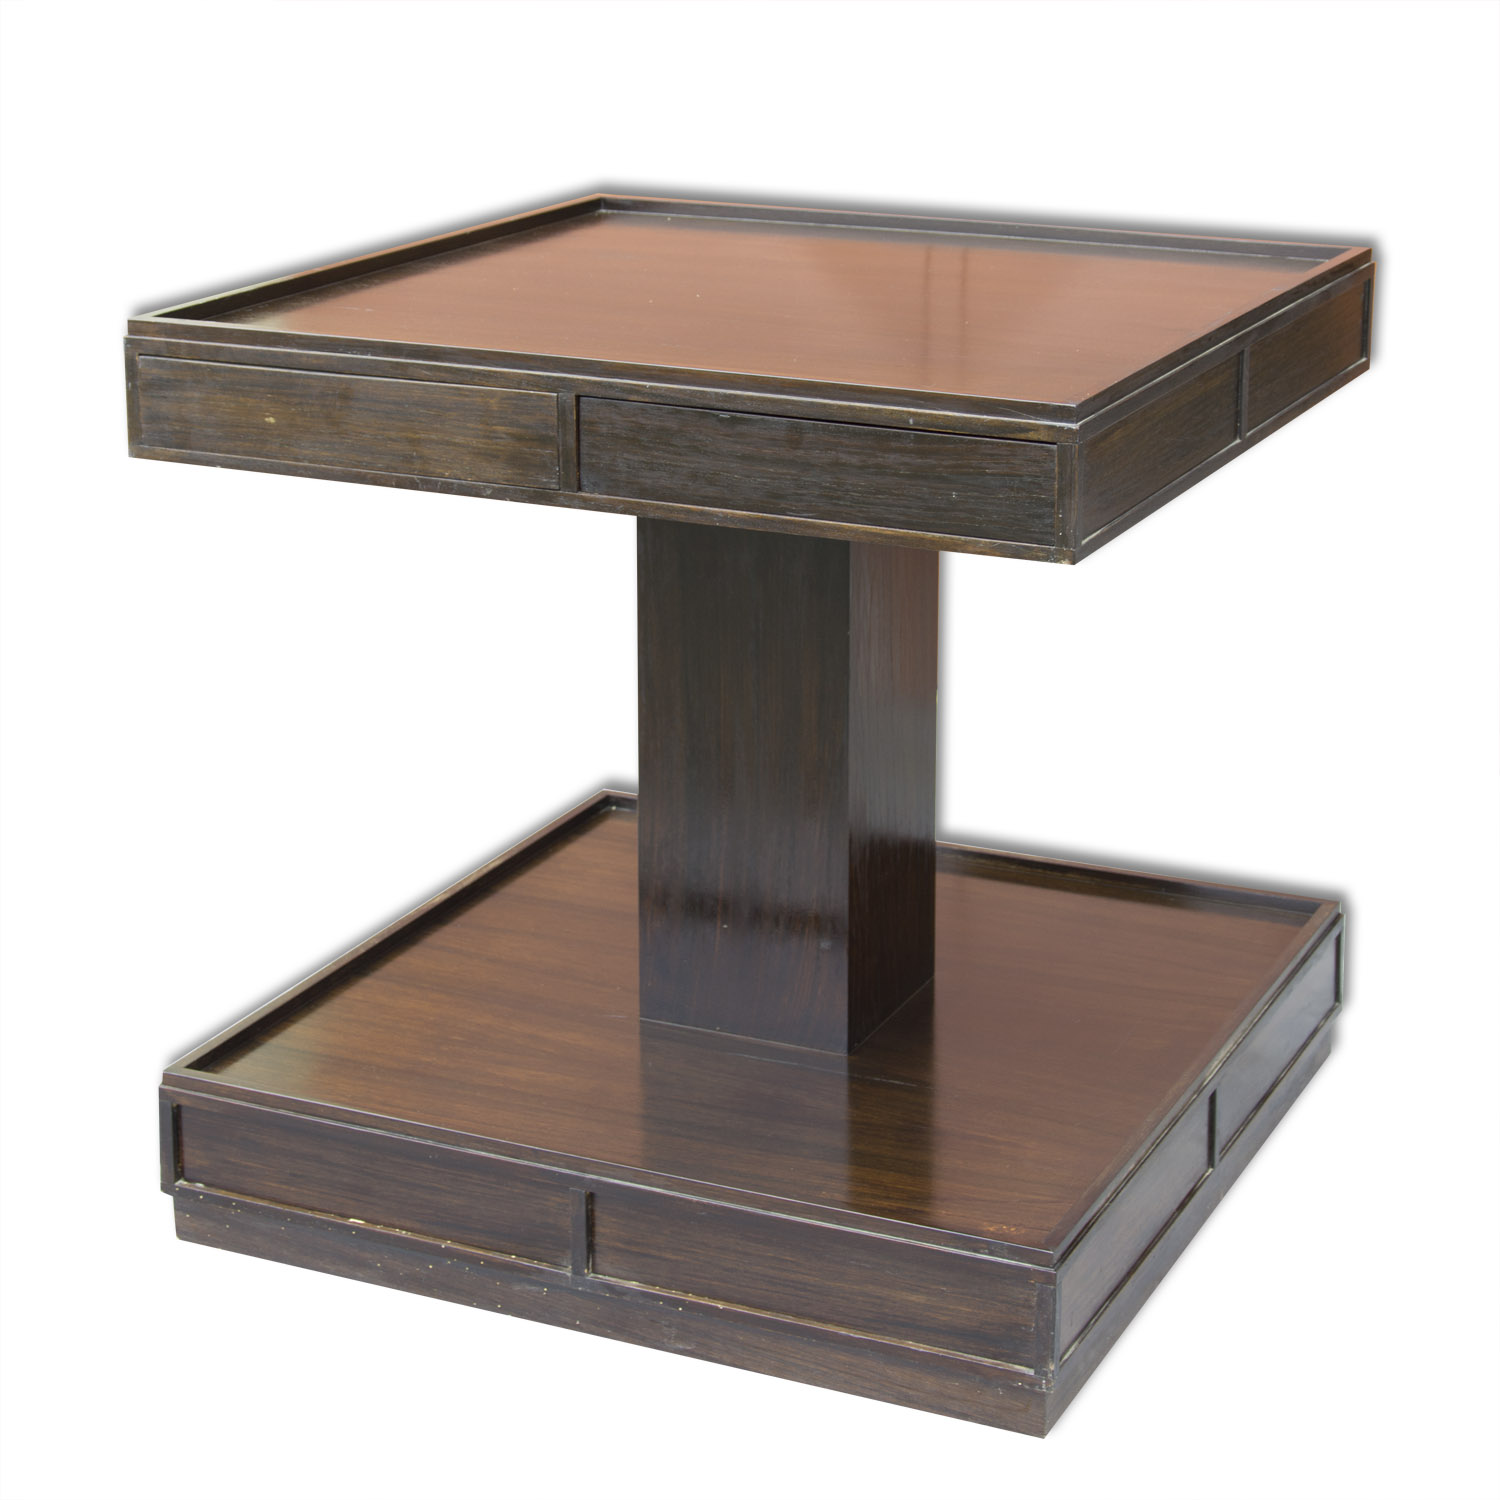 Mid century square rosewood table designed by Gianfranco Frattini, 1960´s, Italy.